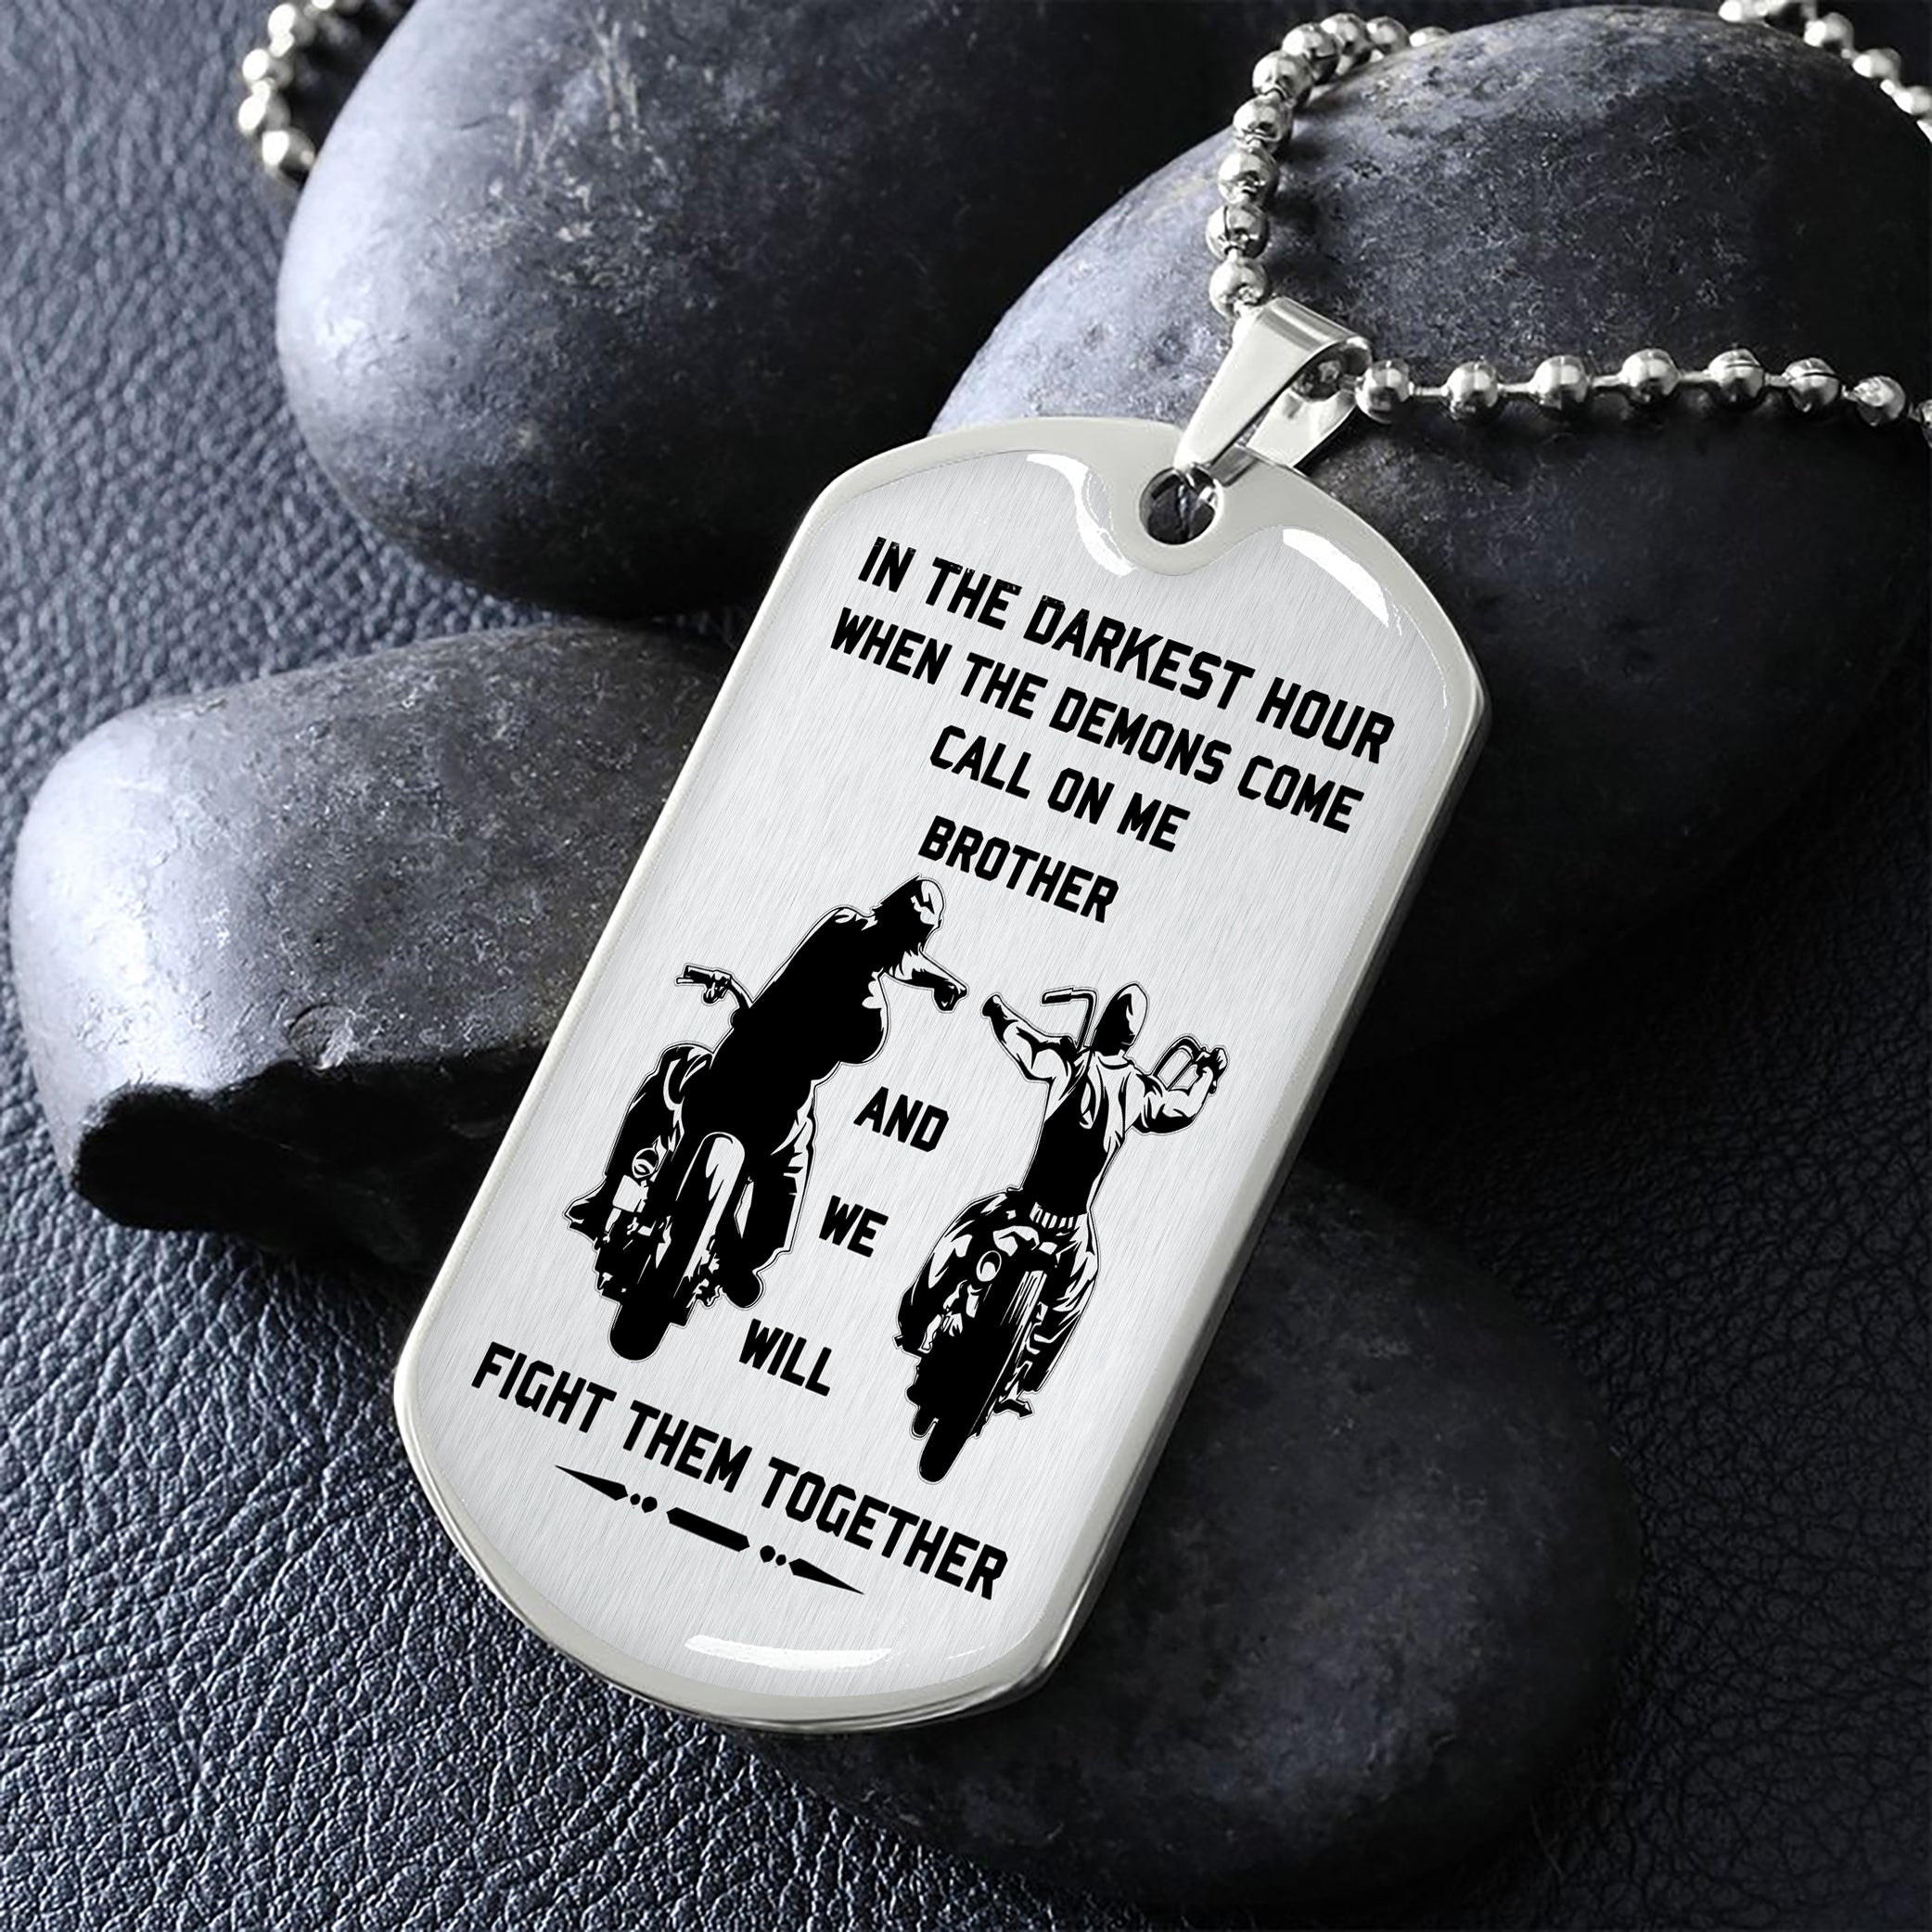 Military Chain Gifts From Brother In The Darkest hour, When the demons come call on me brother and we will fight them together